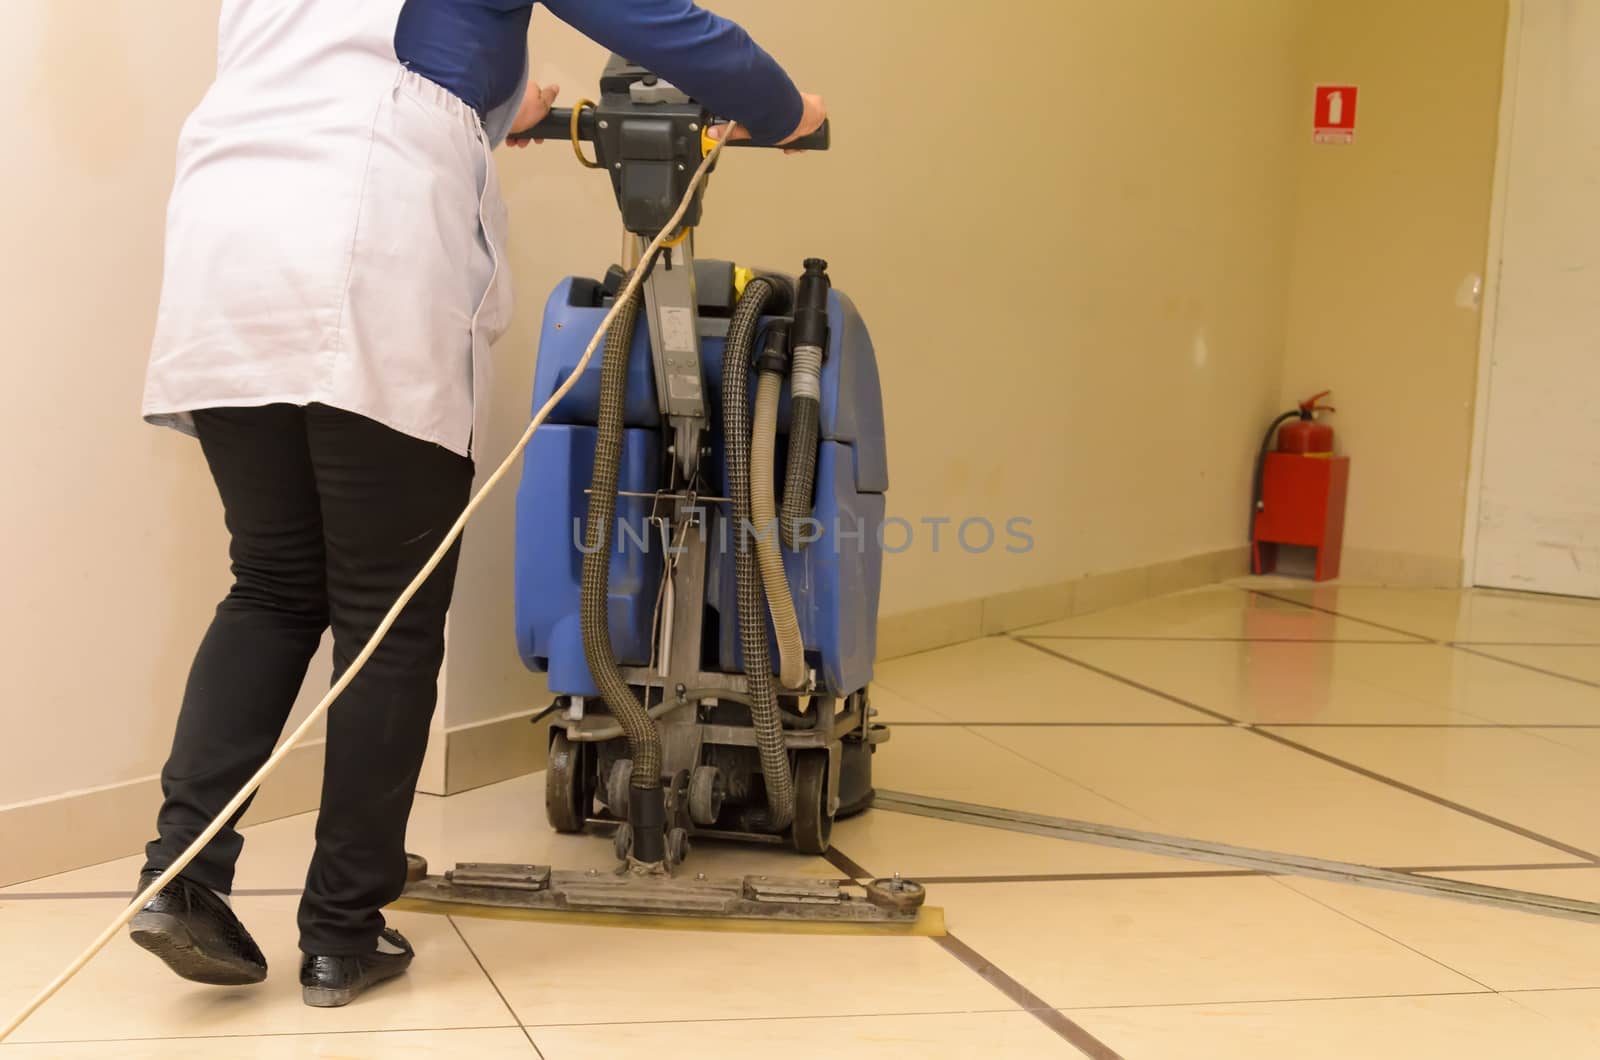  Floor care and cleaning services with washing machine by andre_dechapelle